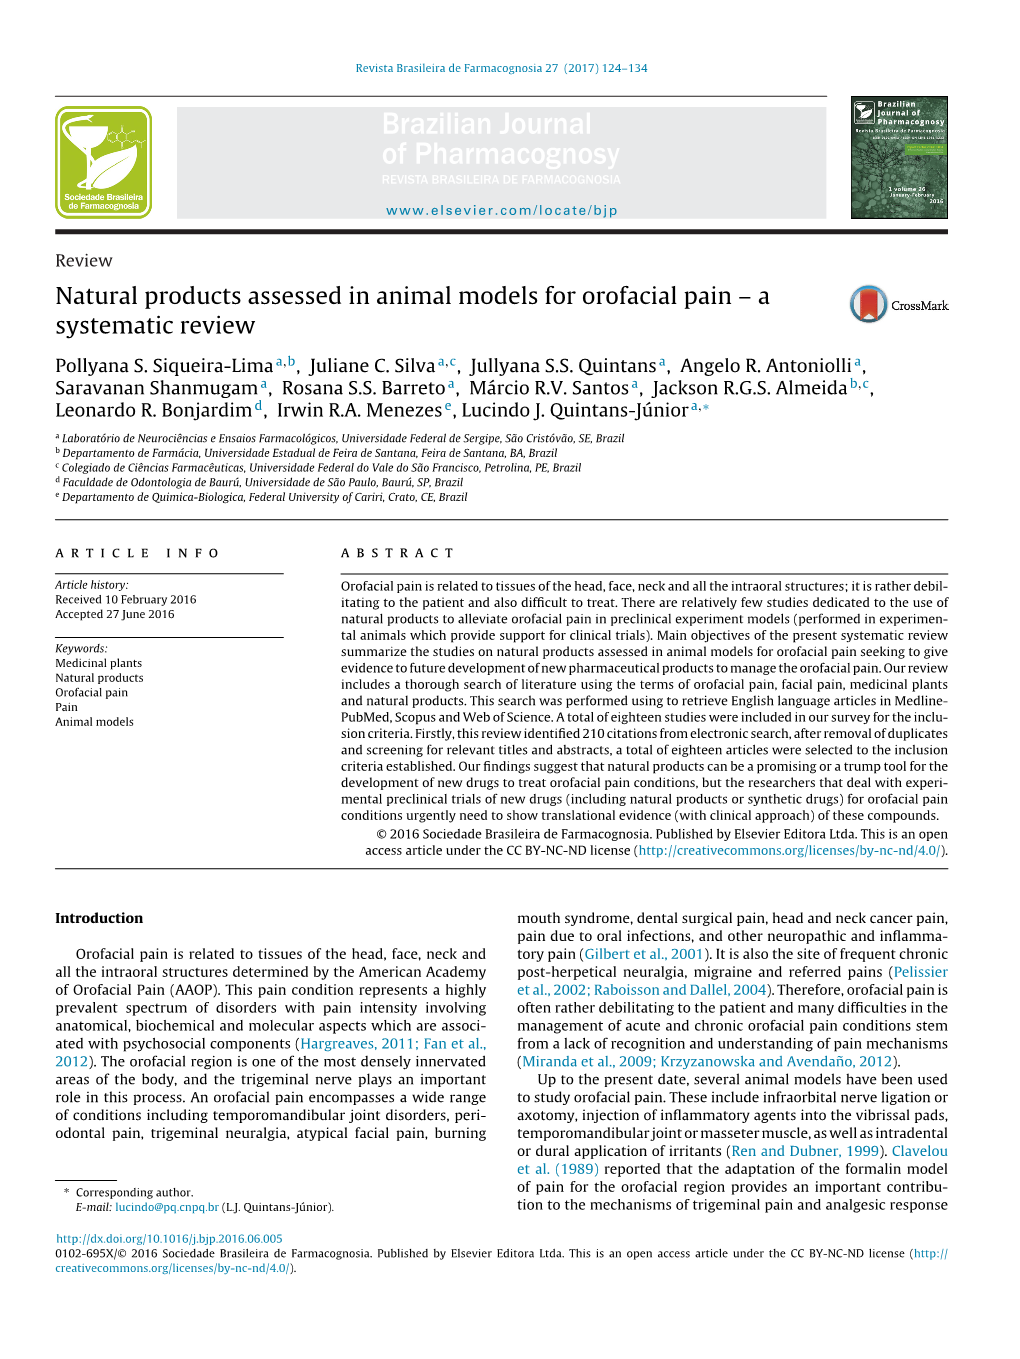 Natural Products Assessed in Animal Models for Orofacial Pain – A